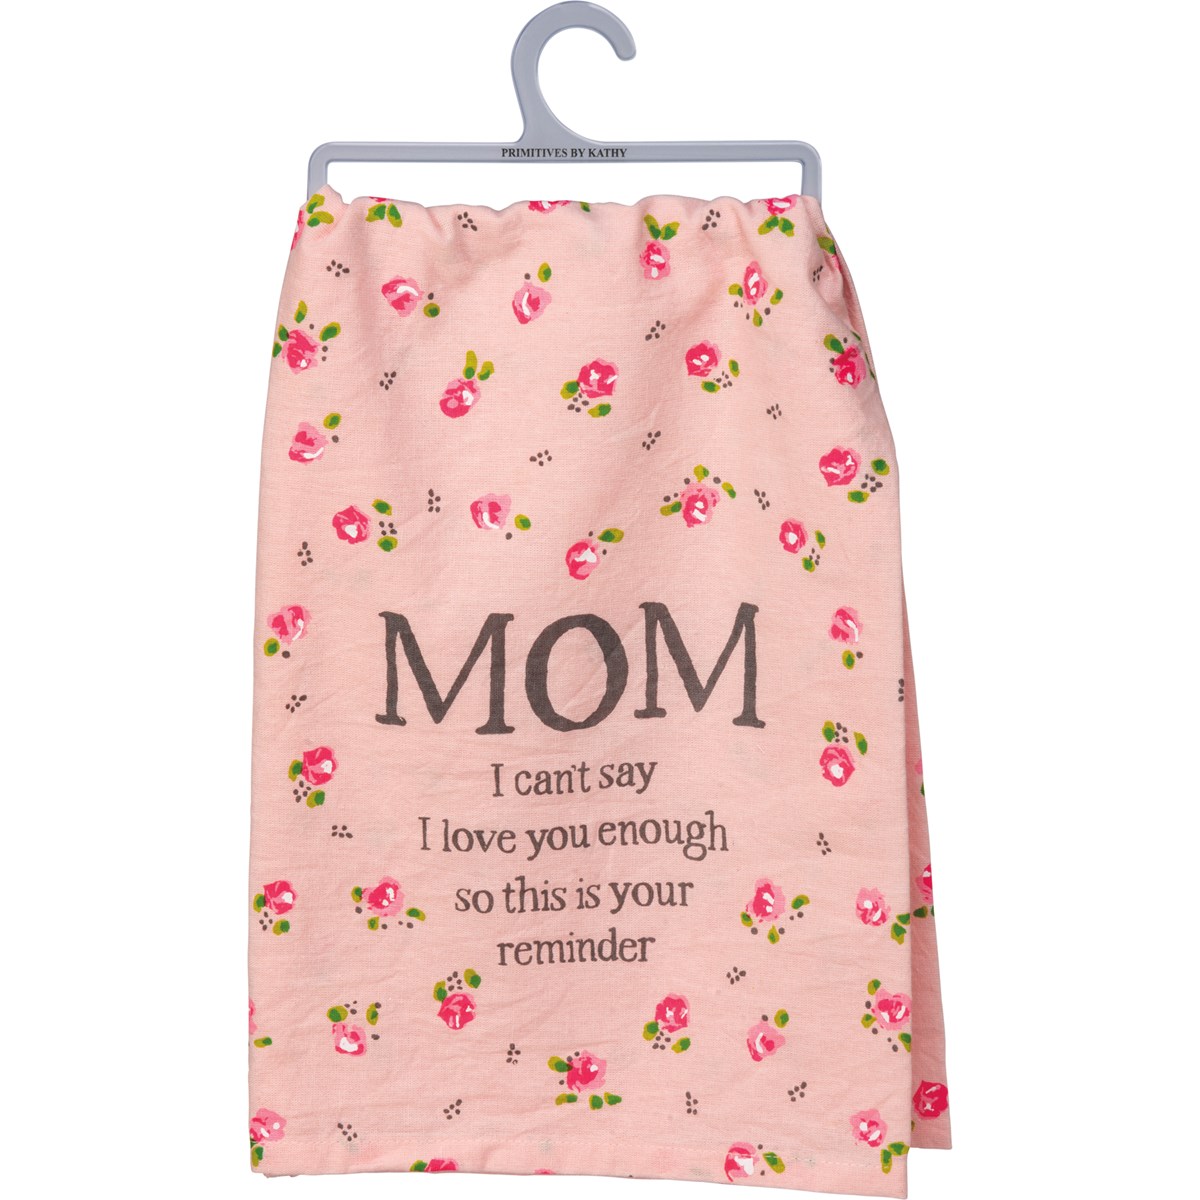 Kitchen Towel - Mom I Can't Say I Love You Enough - 28" x 28" - Cotton